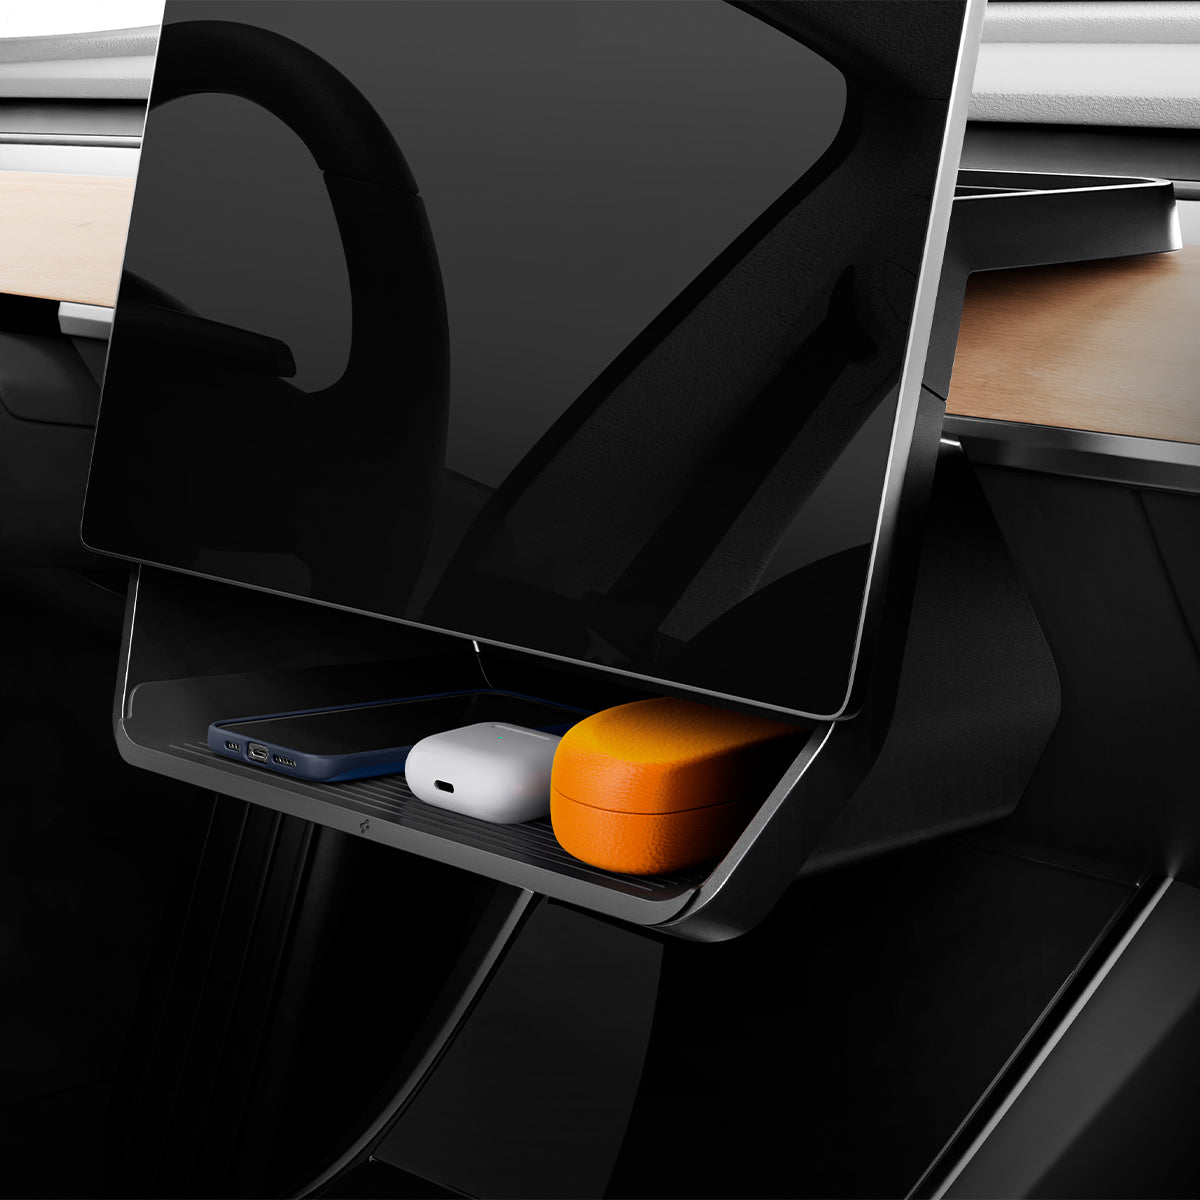 ACP07280 - Tesla Model Y & 3 Under Screen Organizer TO227 in Black showing the front of the device attached to the organizer with accessories and devices inside